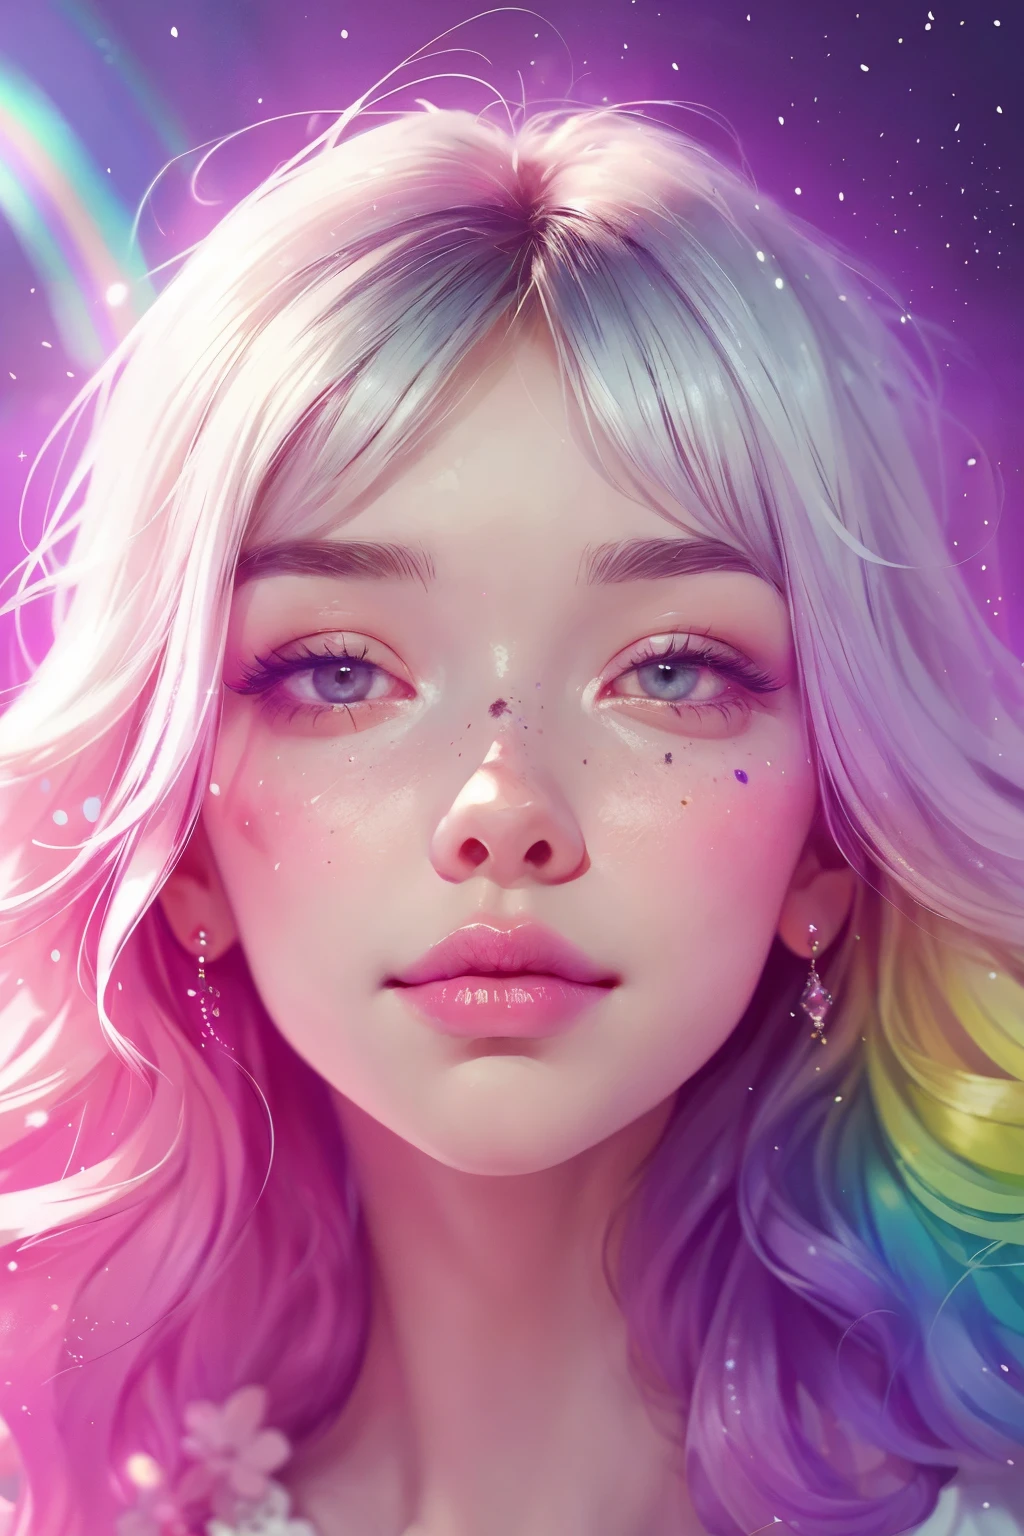 (This is a beautiful rainbow fantasy image that feels interesting and emphasizes glitter and iridescence.) Generate a ((blind)) curvy woman with colorful curly hair and milky white eyes. Her face is important and is perfectly formed with puffy lips and perfect features. (Her eyes are critically important and are (blank) and (solid white)). The image exudes ethereal beauty and soft fantasy. Include sweet and detailed birds and soft, luminous flowers in all the colors of the rainbow. The image's background is decorated in shades of pink, shimmer, glitter, and fantasy details like colored bubbles and cosmos. Utilize dynamic composition to create a compelling and action-packed image. Dramatic lighting and cinematic lighting enhance the woman's beauty and the soft colors in the artwork. (((((Perspective: head on.))))) Include fantasy, cute, colorful, colourful, interesting magic background, ((((blank eyes)))), ((((empty white eyes)))), (shirome eyes:1.3), (smirking), (perfectly rendered solid whiteeyes), ((birthmark on lip)), ((pretty lips)), beautiful background, complex background, sweet background, (((rainbow)))